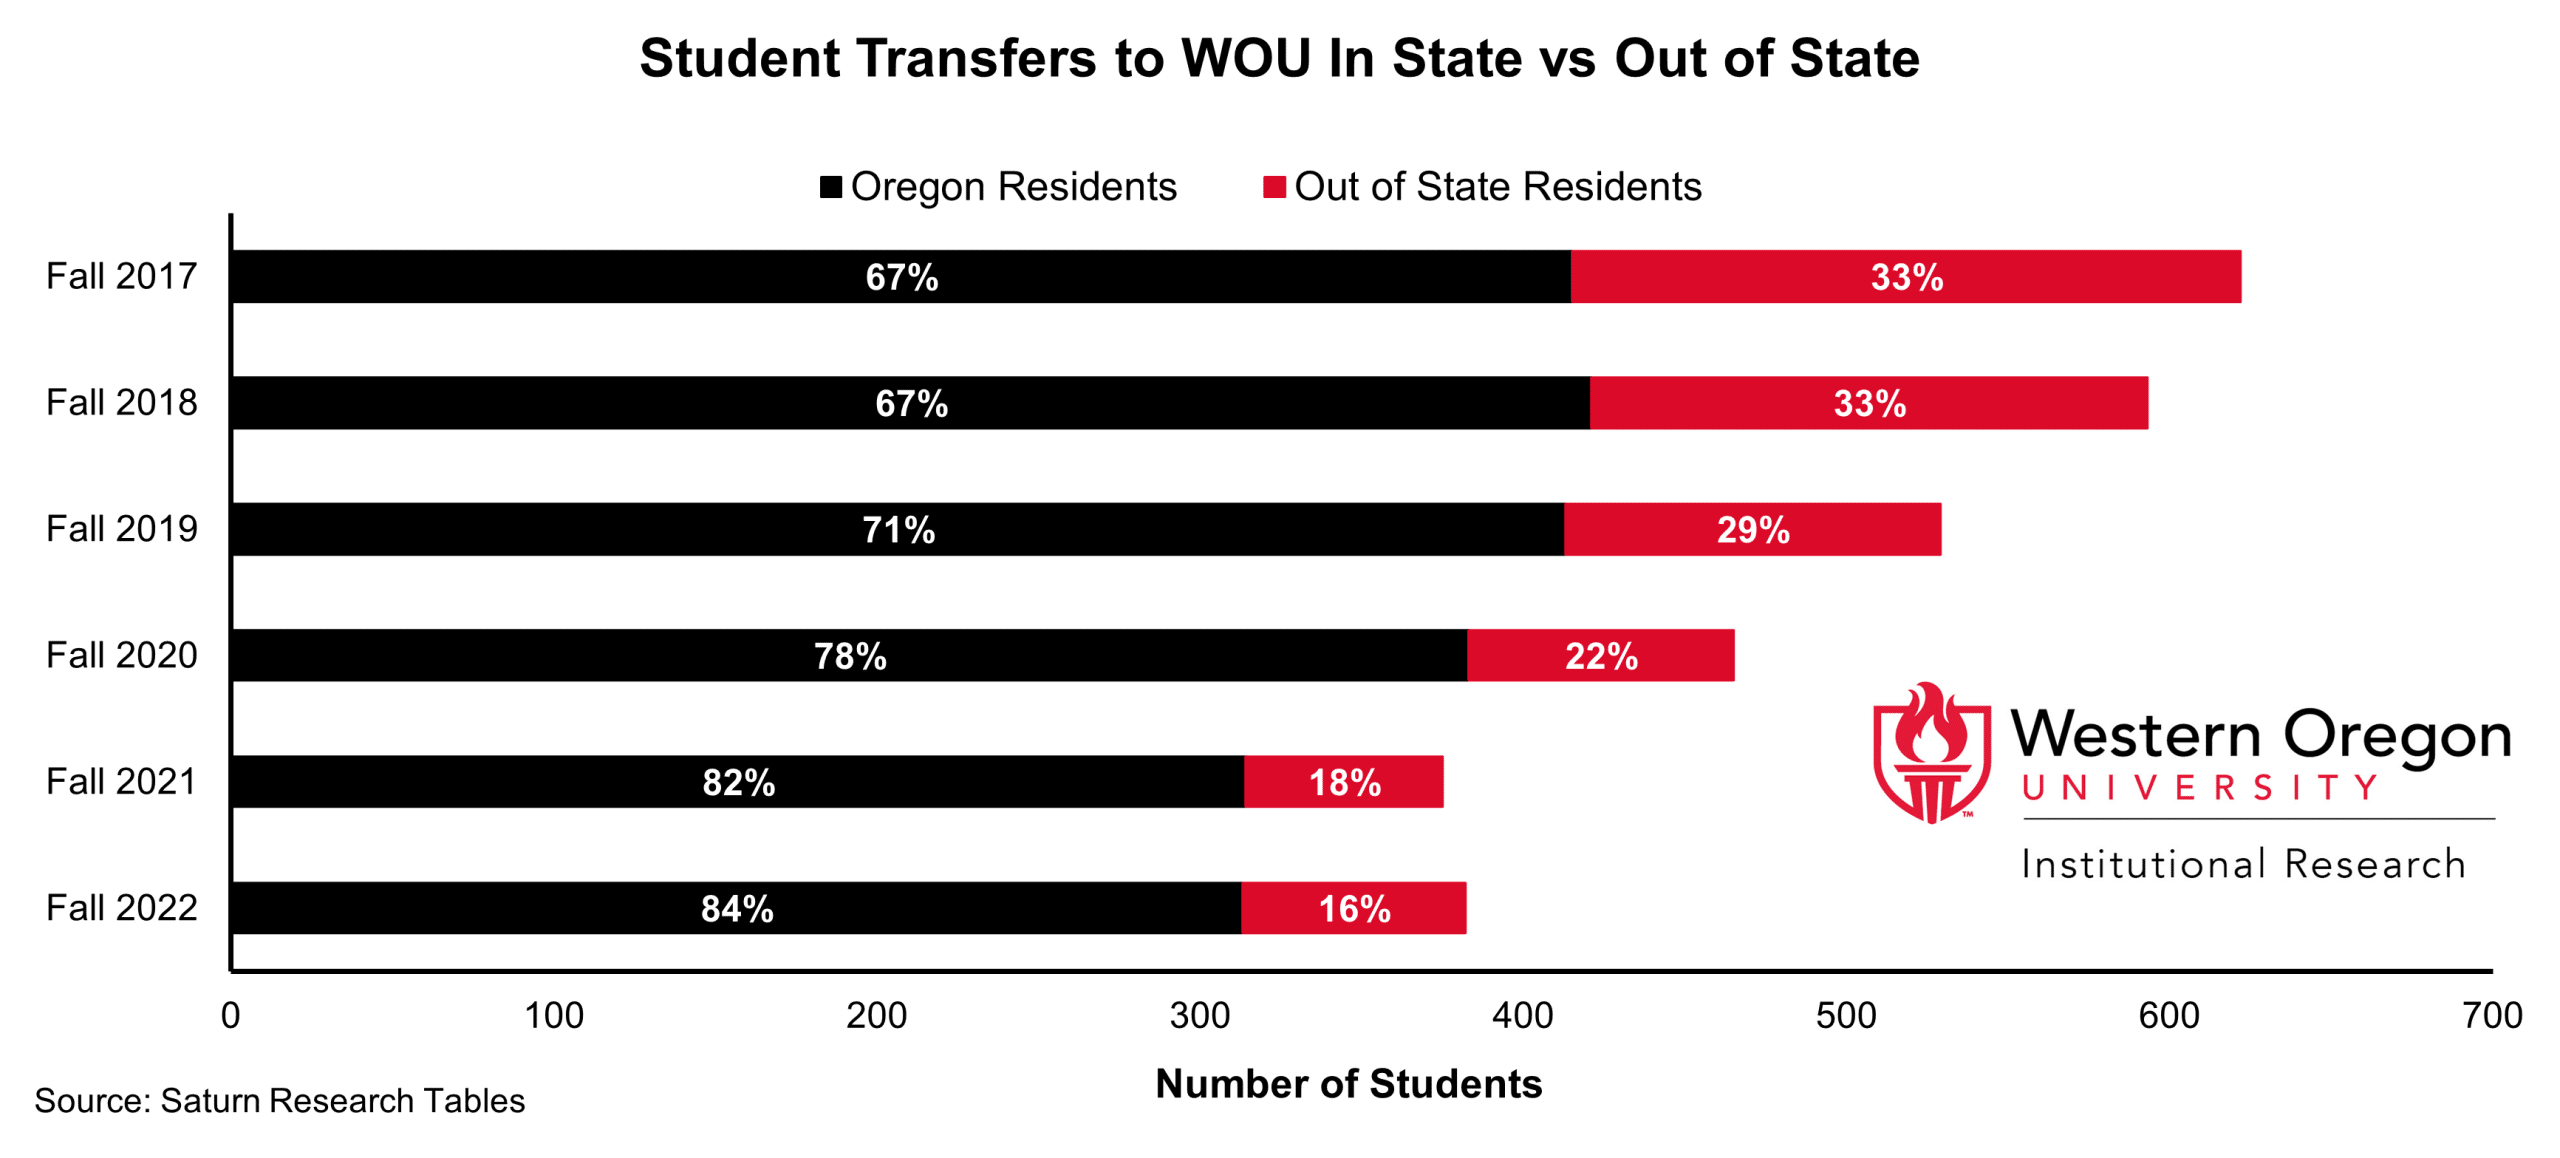 Actual numbers of transfer students and percentages by residency status